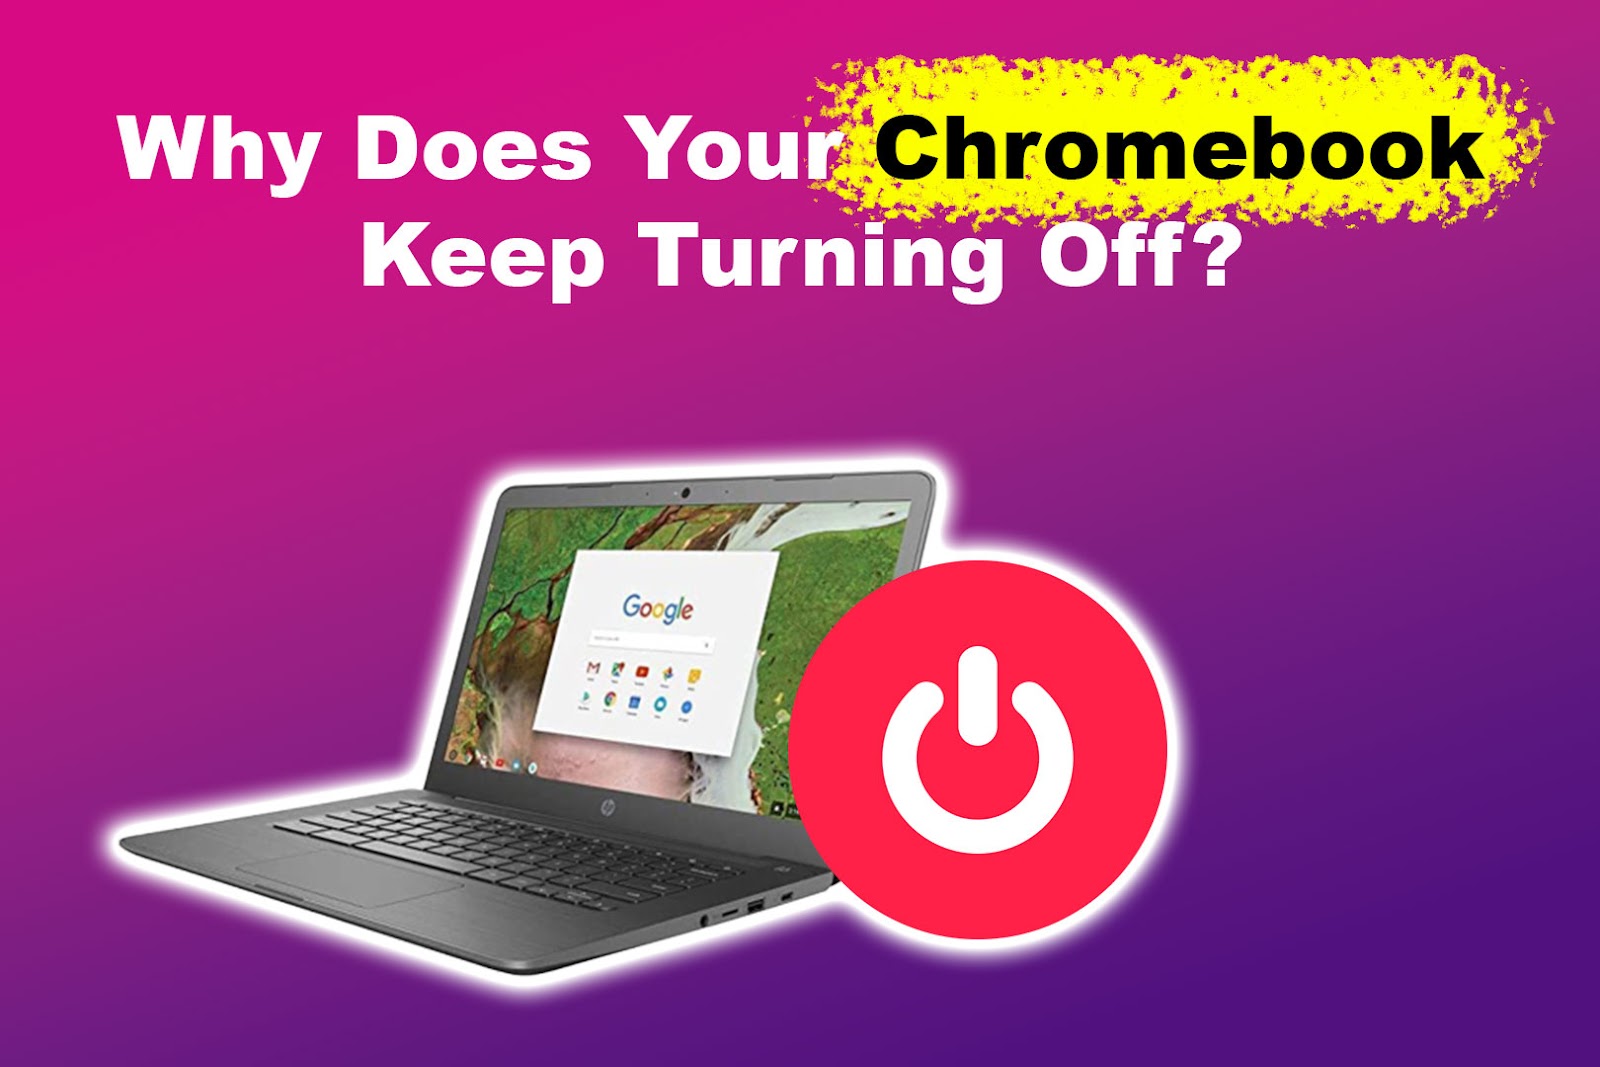 Why Does Your Chromebook Keep Turning Off